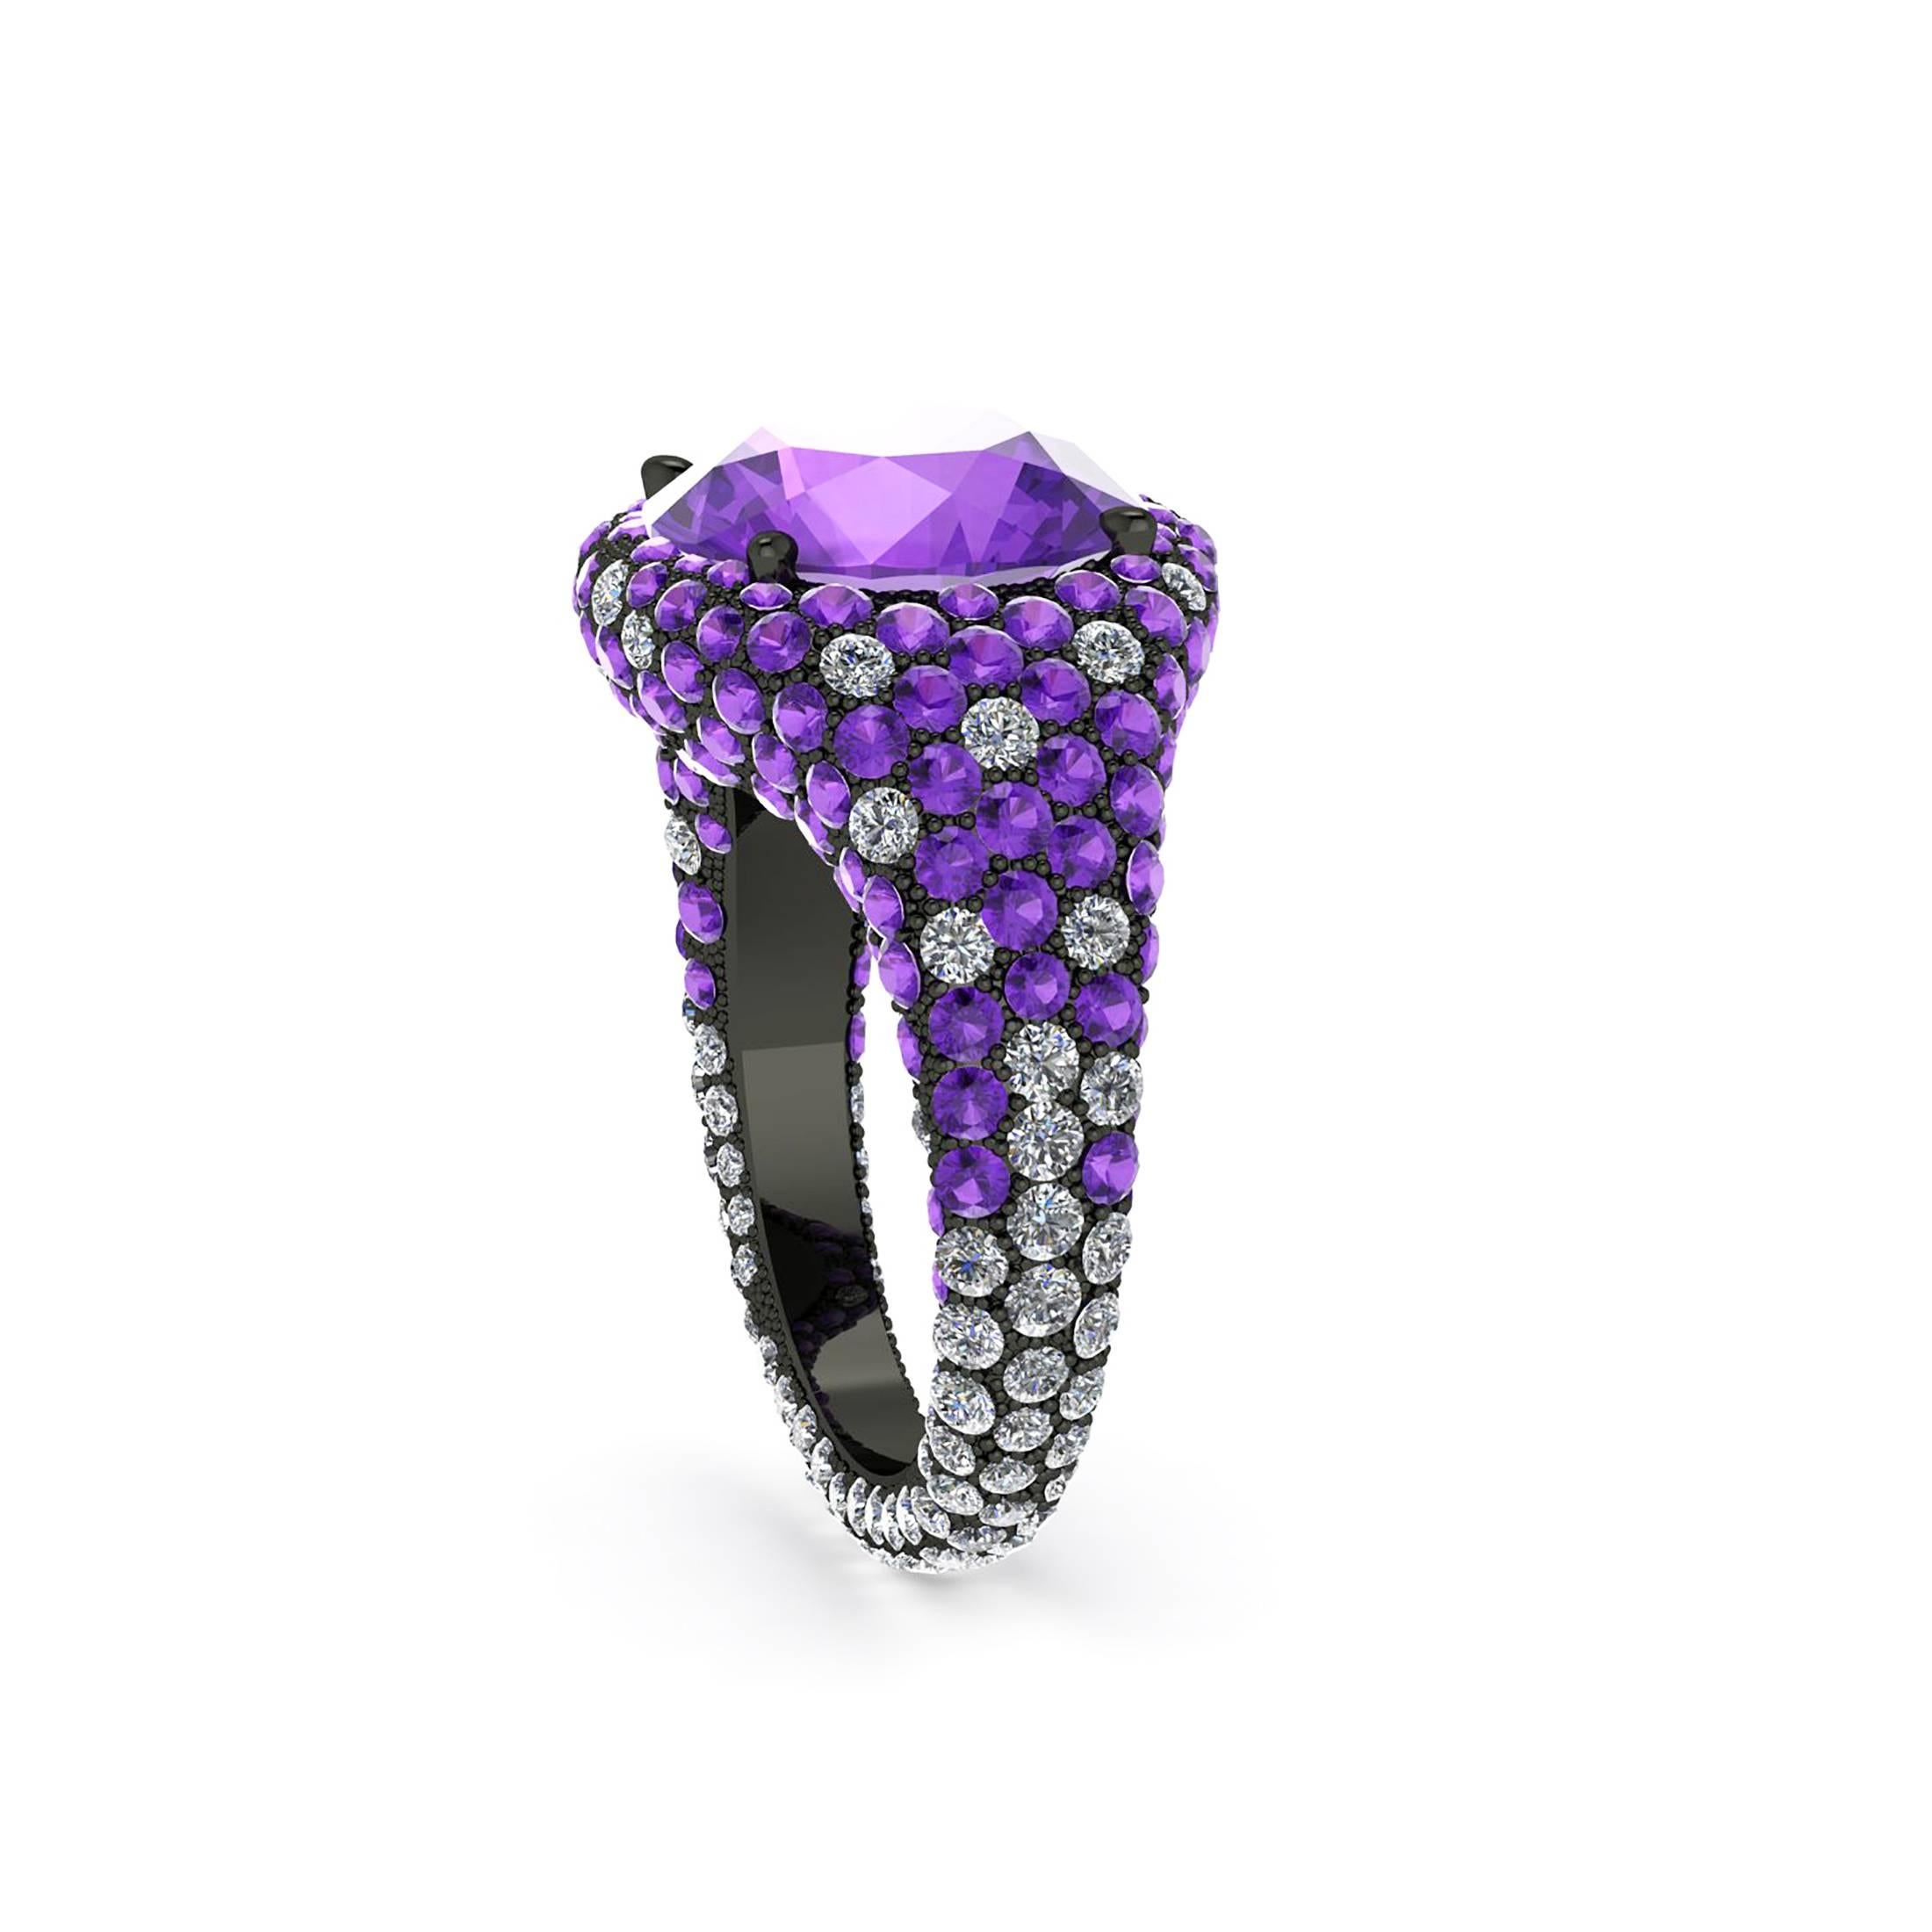 Ferrucci unique 3.50 carats round brilliant cut natural Amethyst, set in a black 18k gold ring designed and hand made in New York City by master jeweler Francesco Ferrucci, showcasing a spectacular 1.25 carats of bright white diamonds and